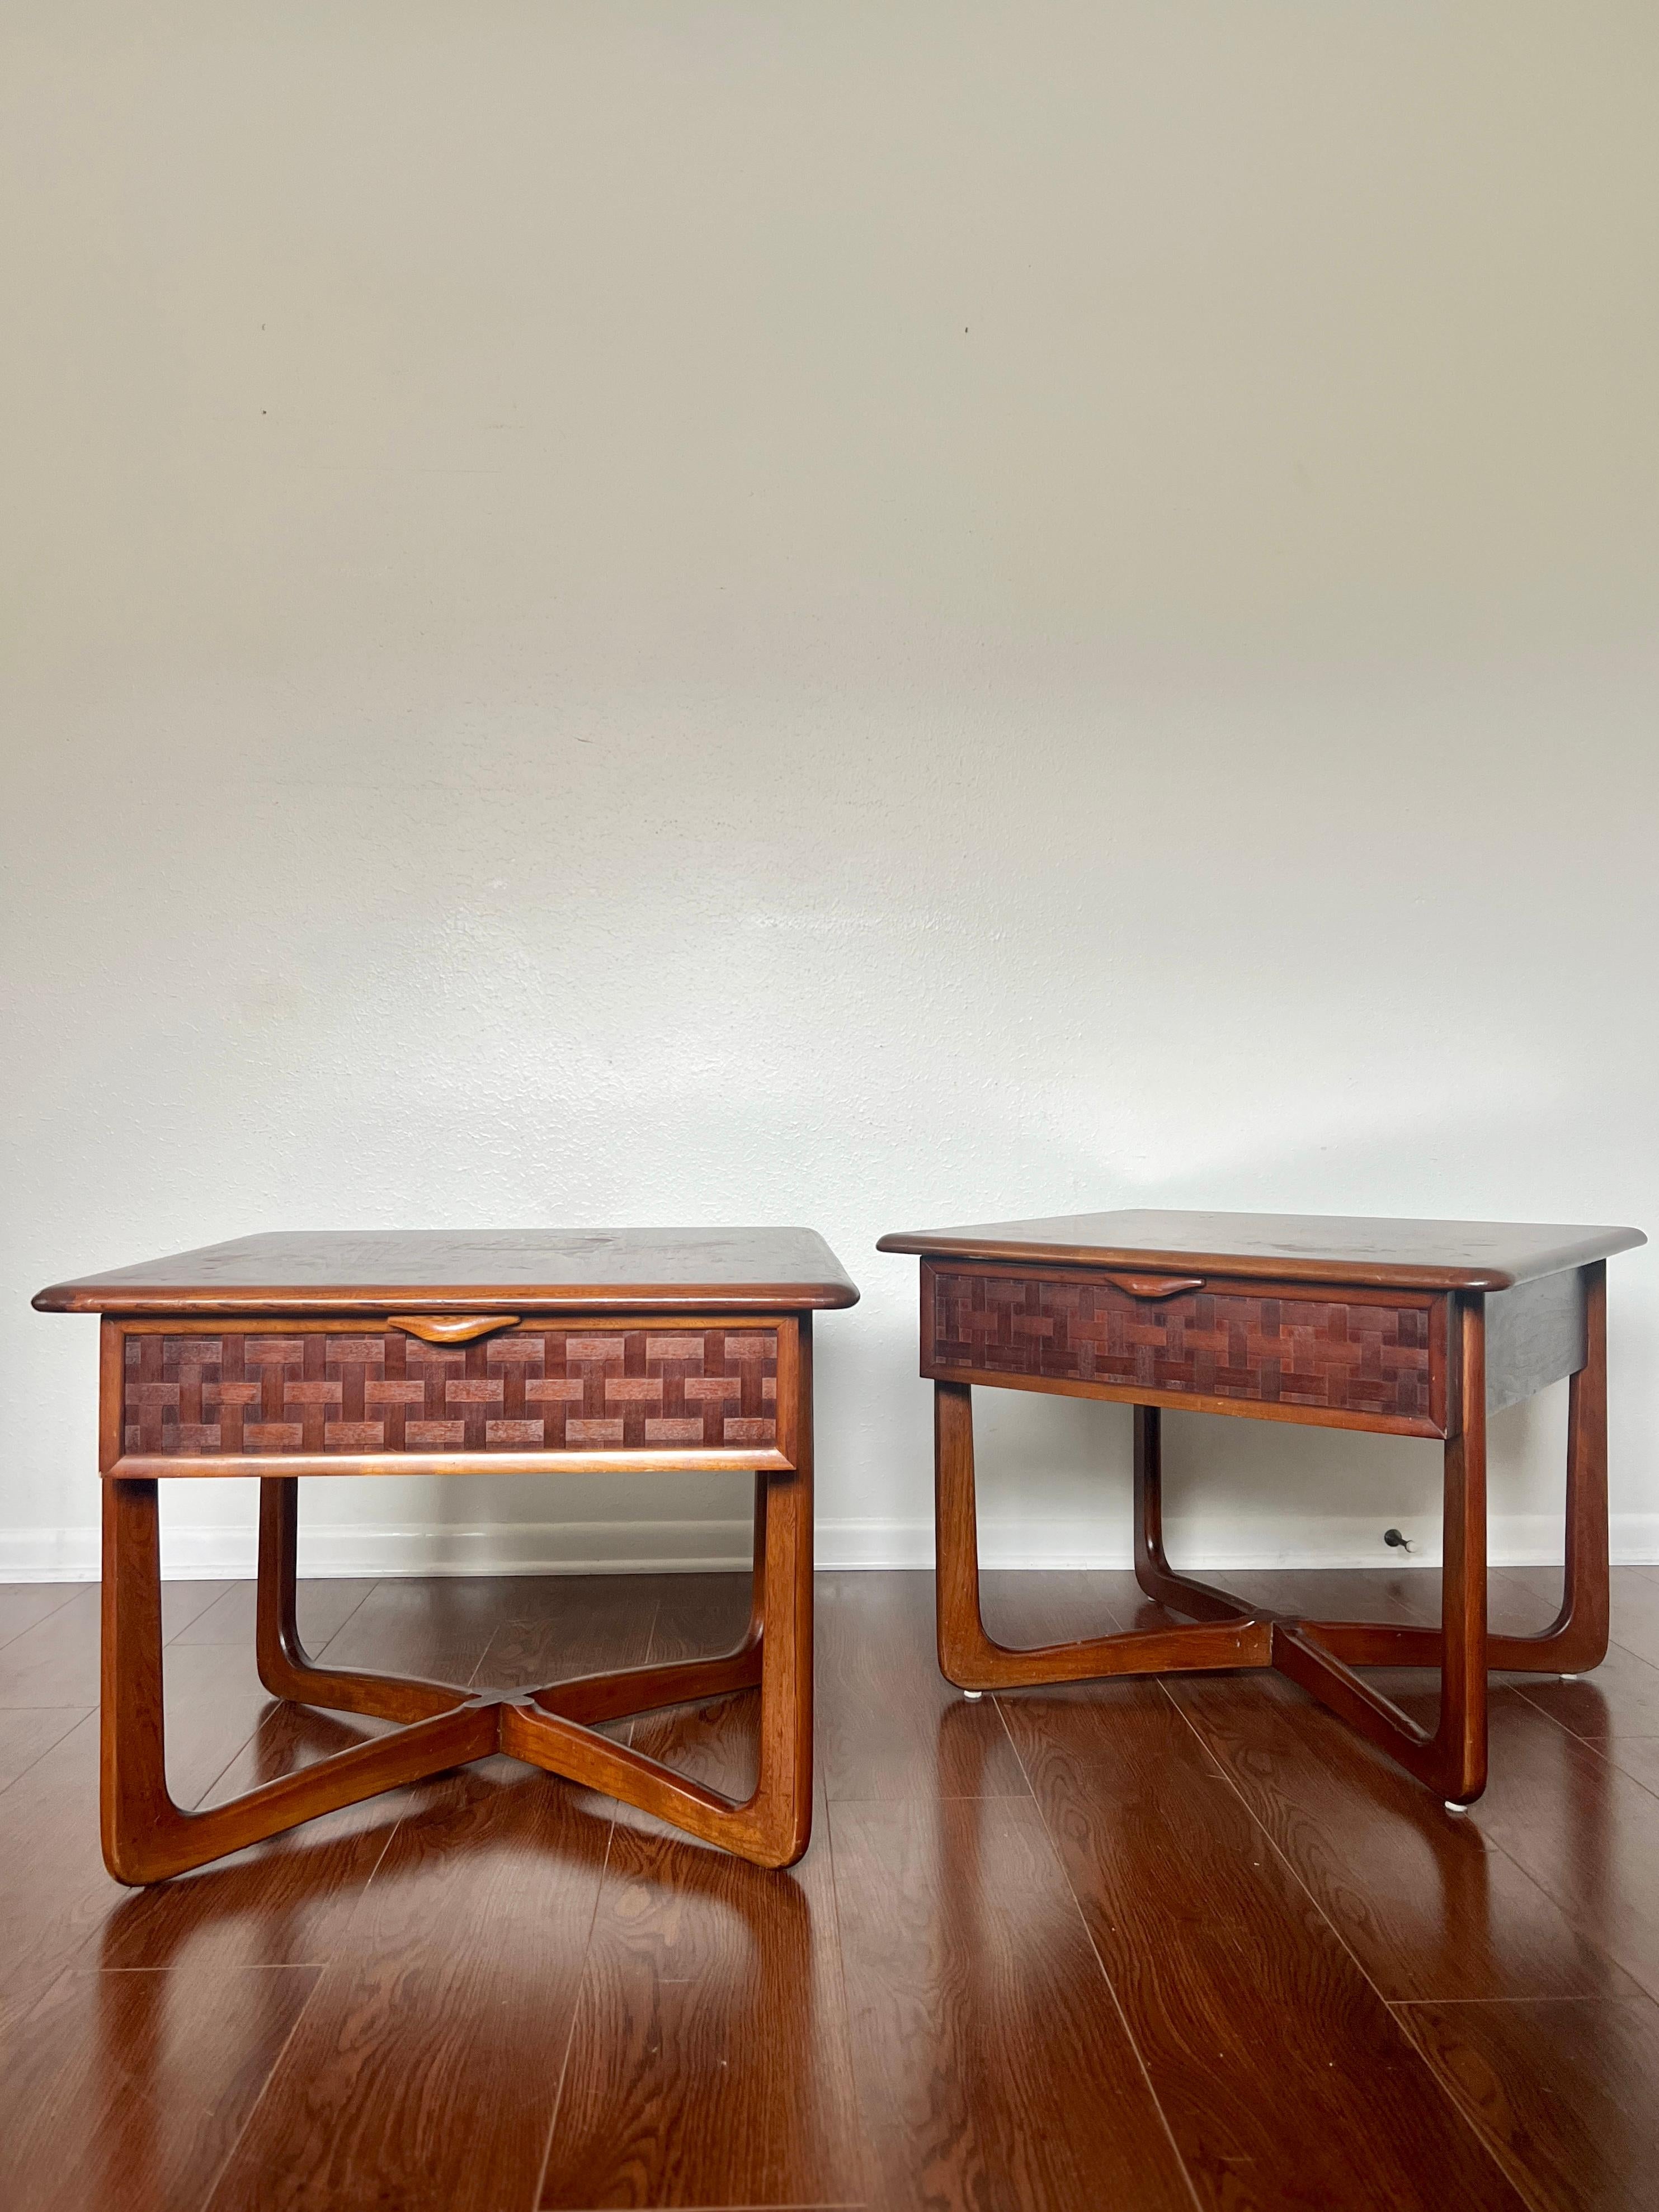 Pair of Mid-Century Modern Lane Perception Side Tables with a Cross Cross Base 2